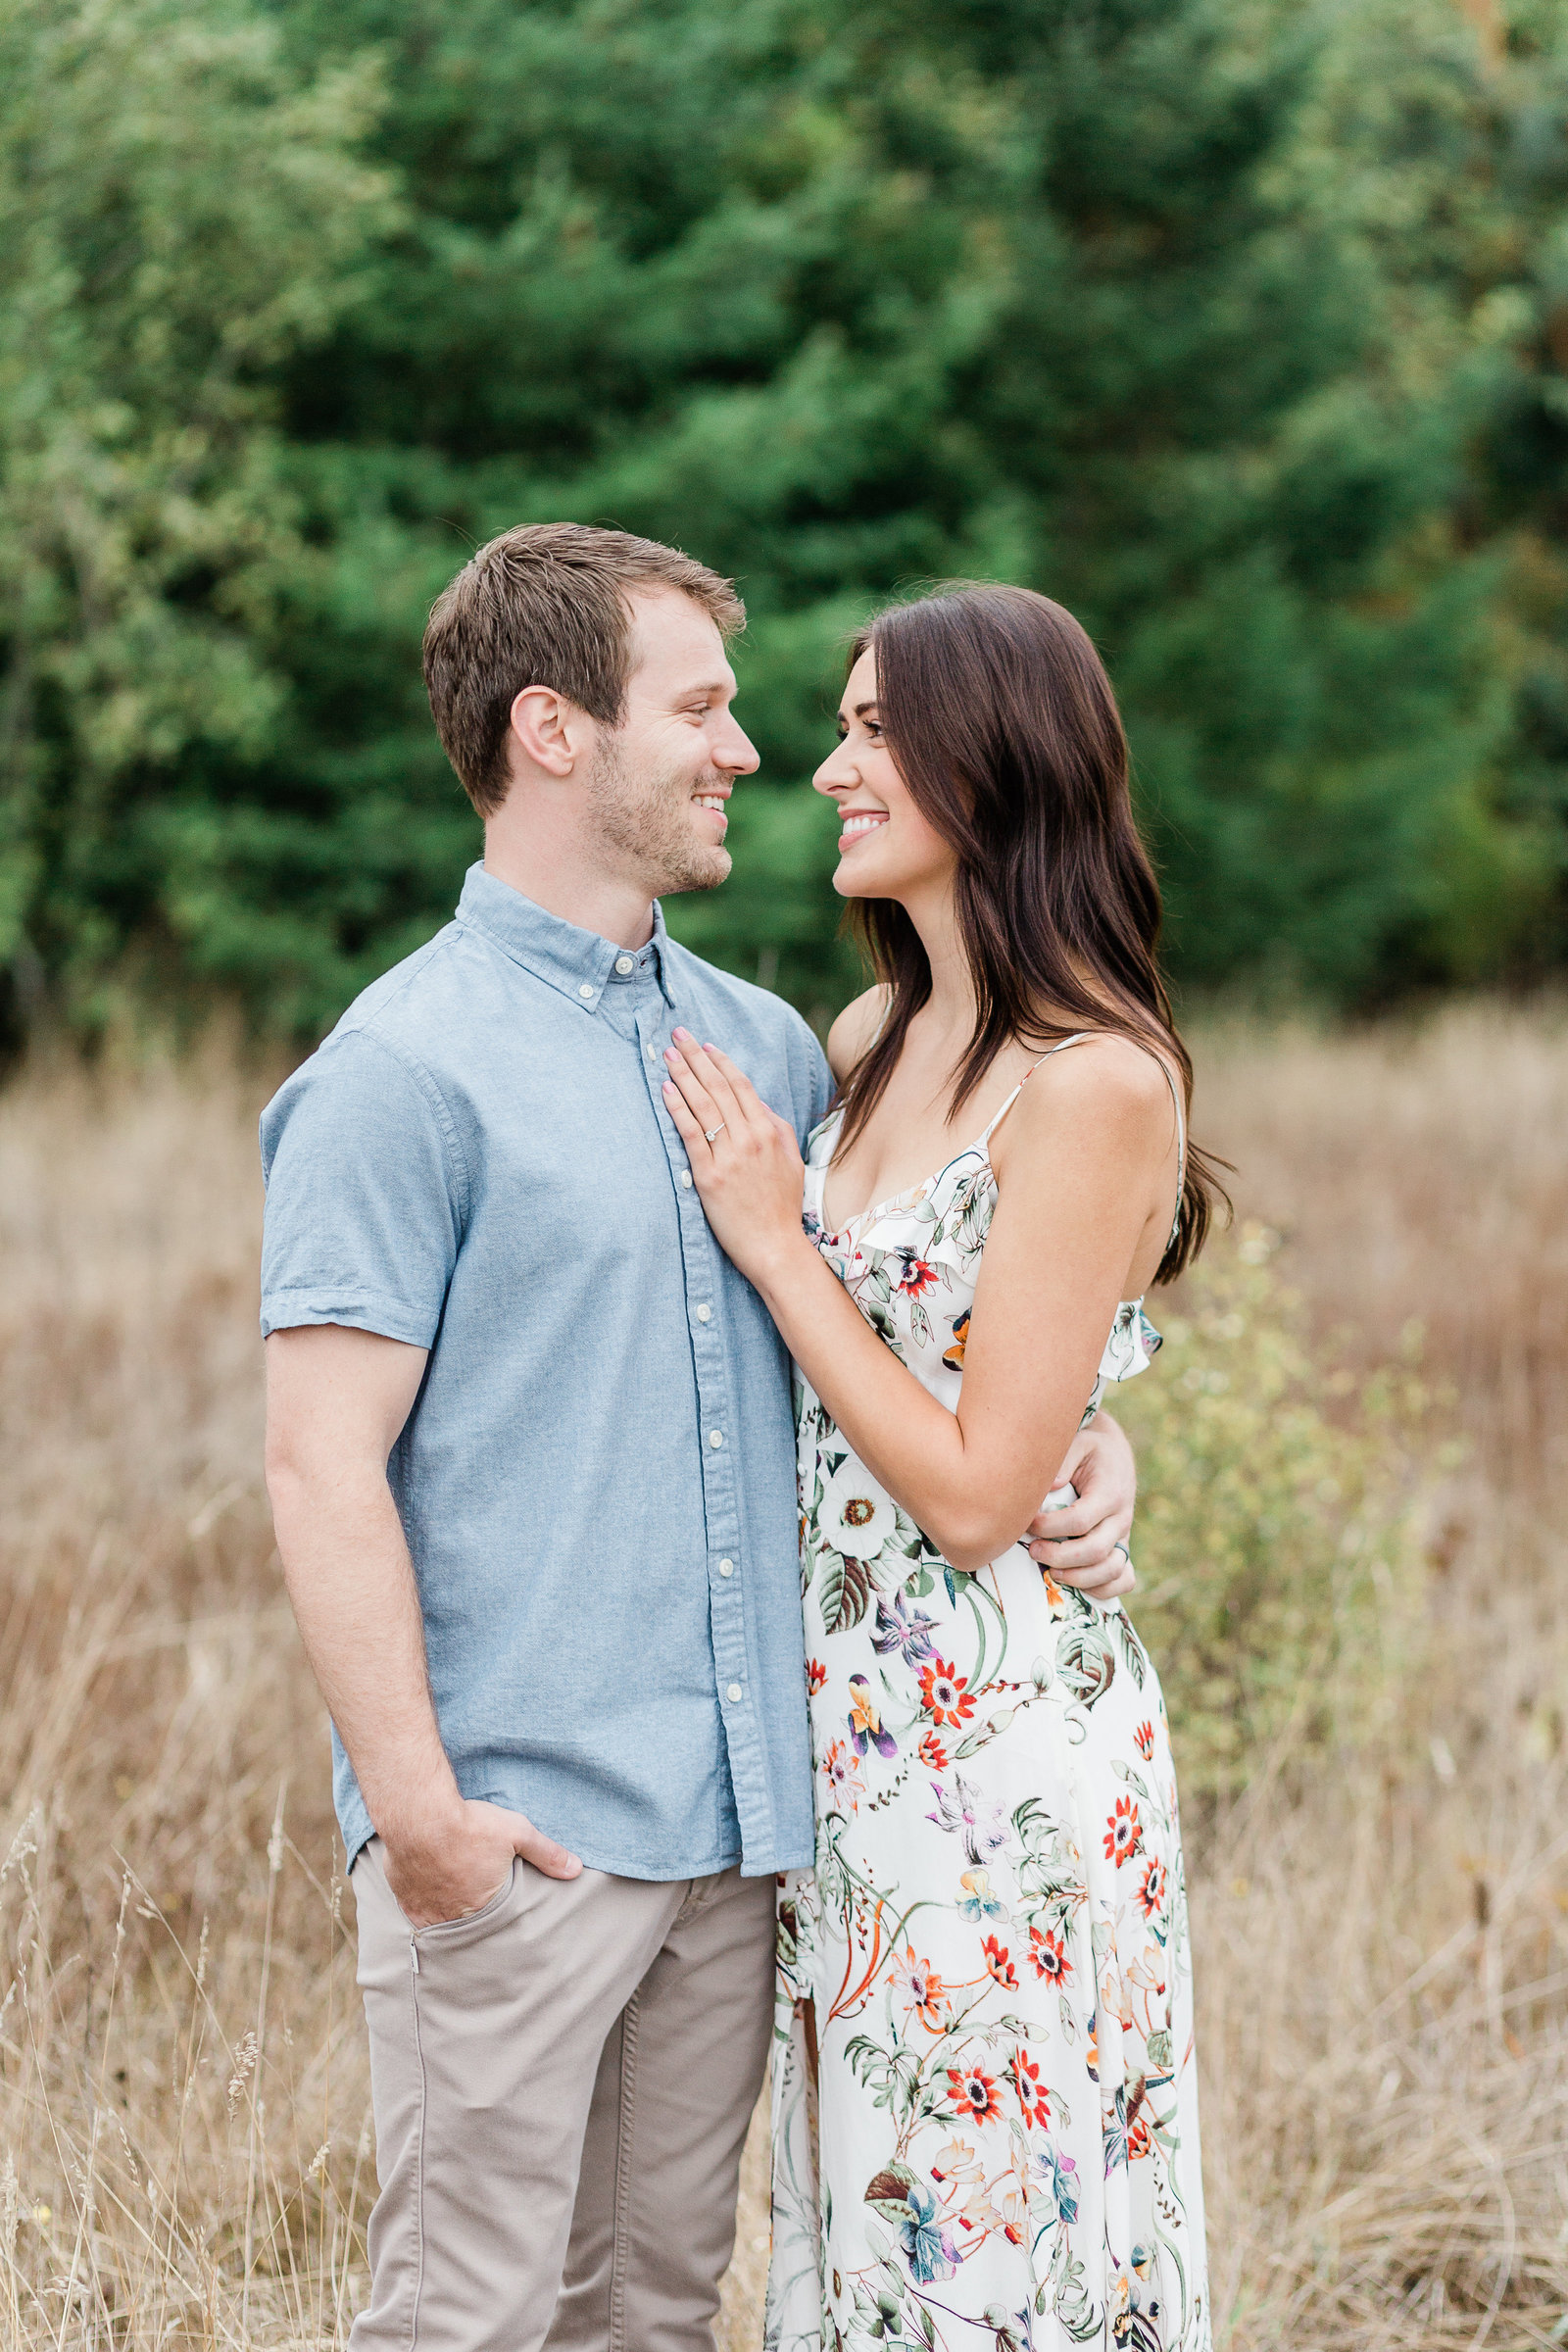 Taylor-TJ-Engagements-Georgia-Ruth-Photography-35